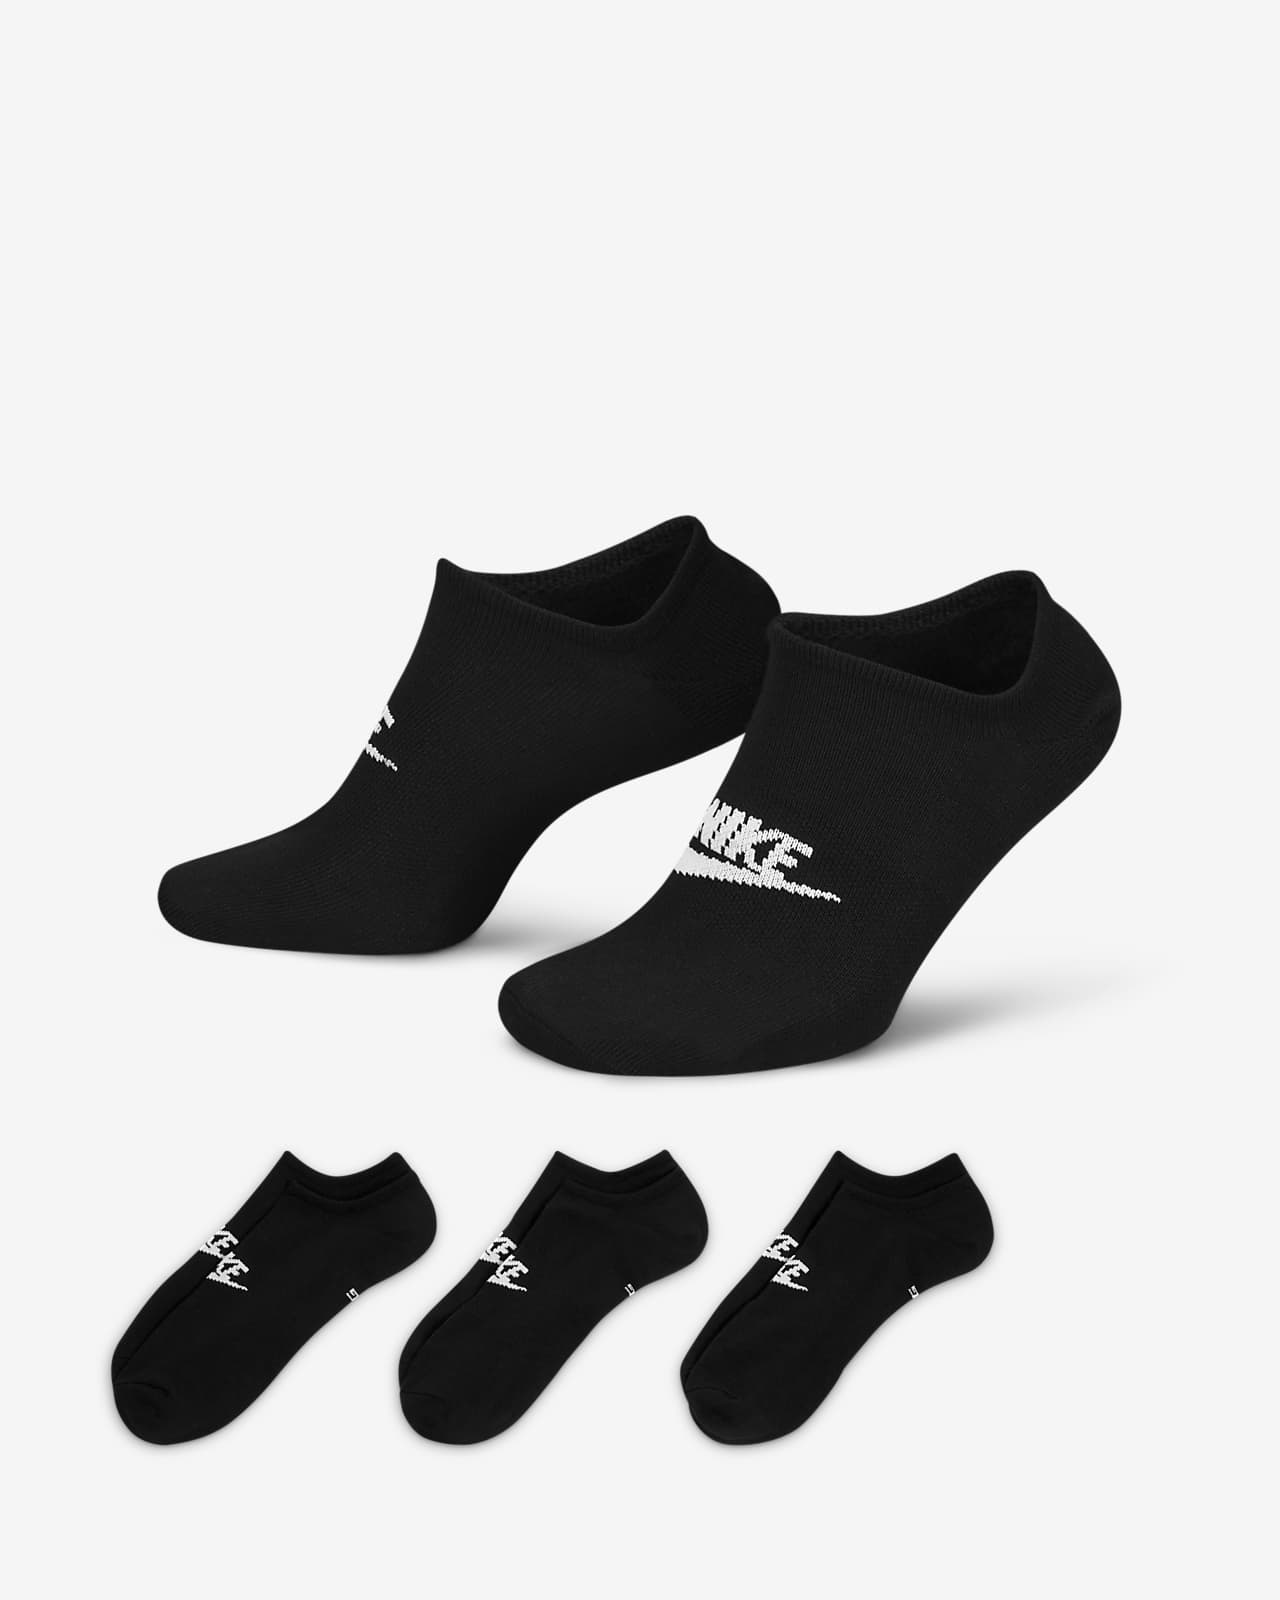 Chaussettes invisibles Nike Sportswear Everyday Essential (3 paires)